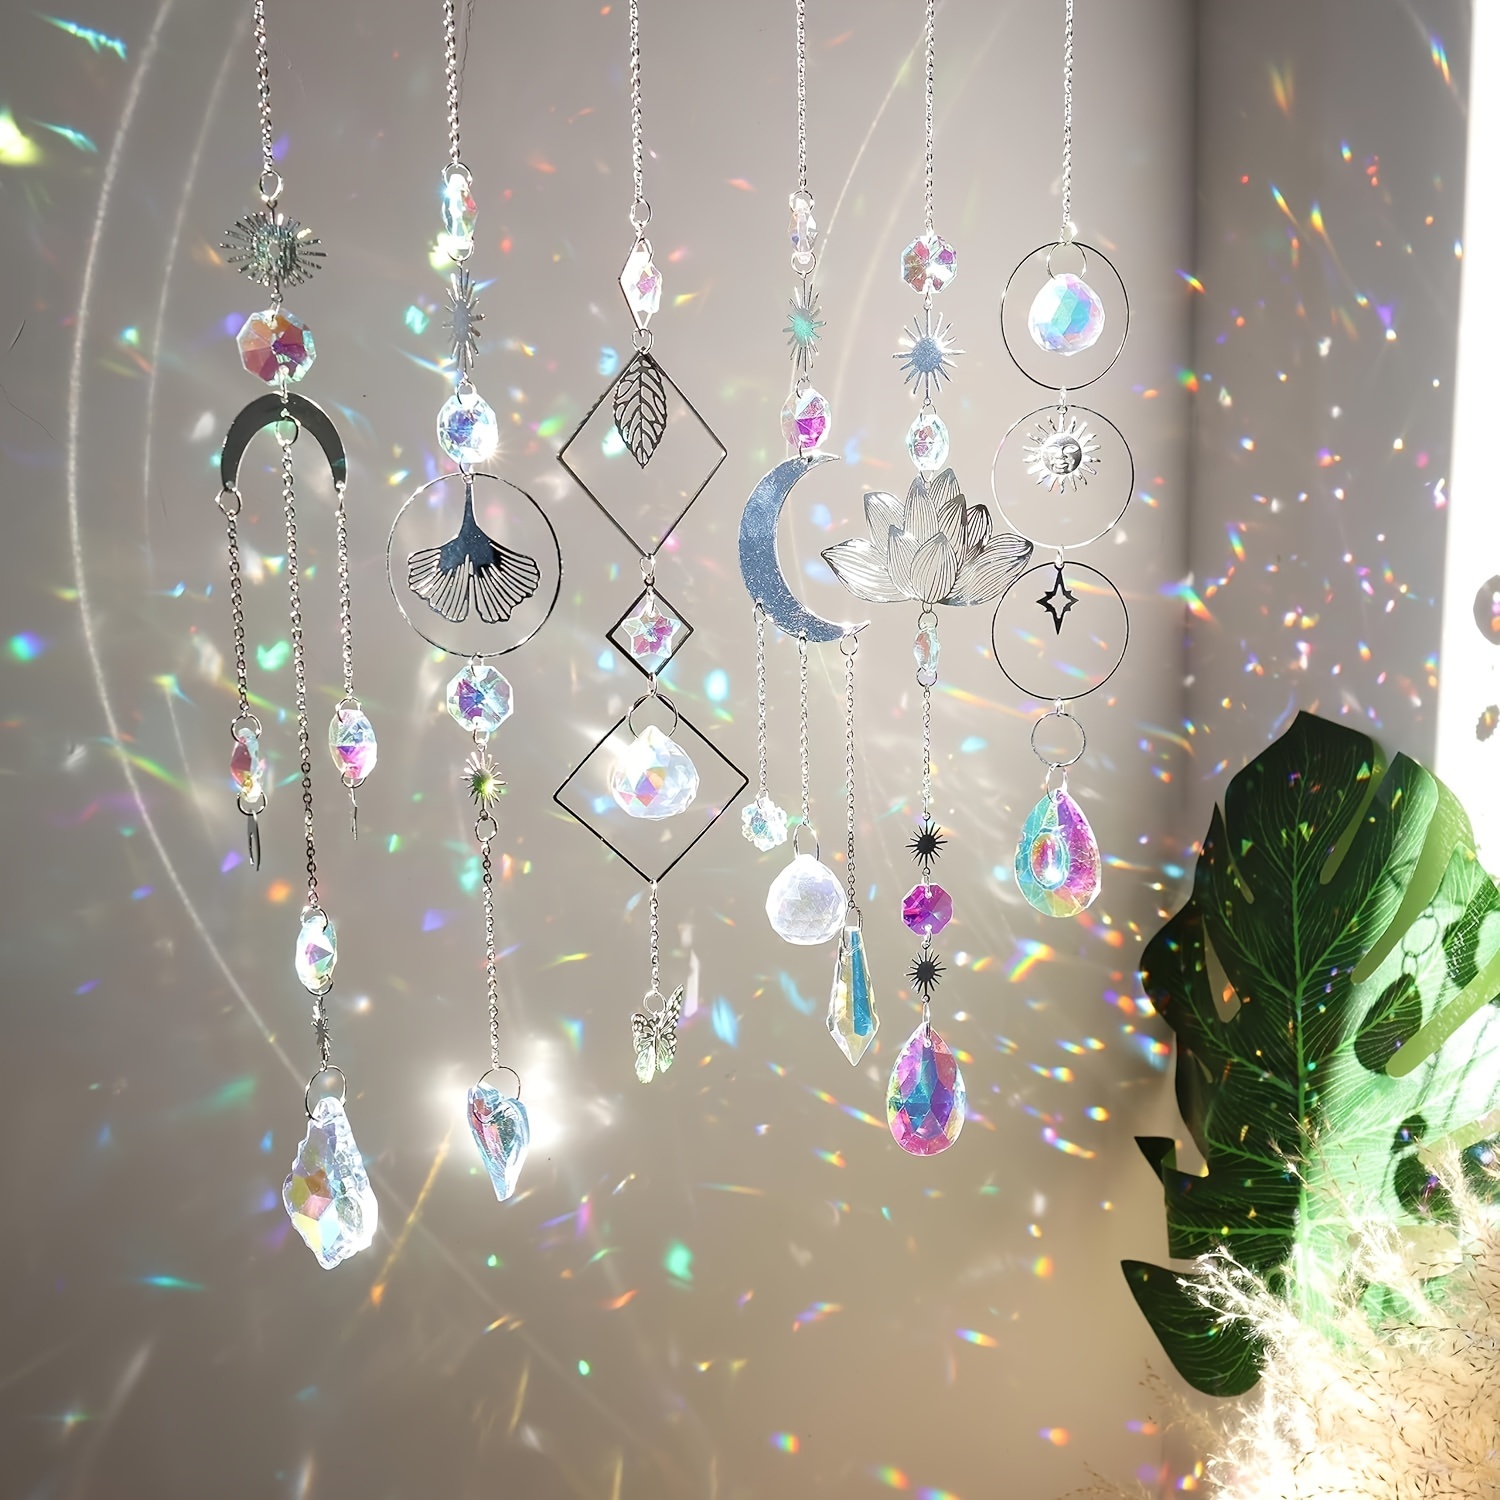 1 Piece Colorful Crystals Suncatcher Hanging Sun Catcher with